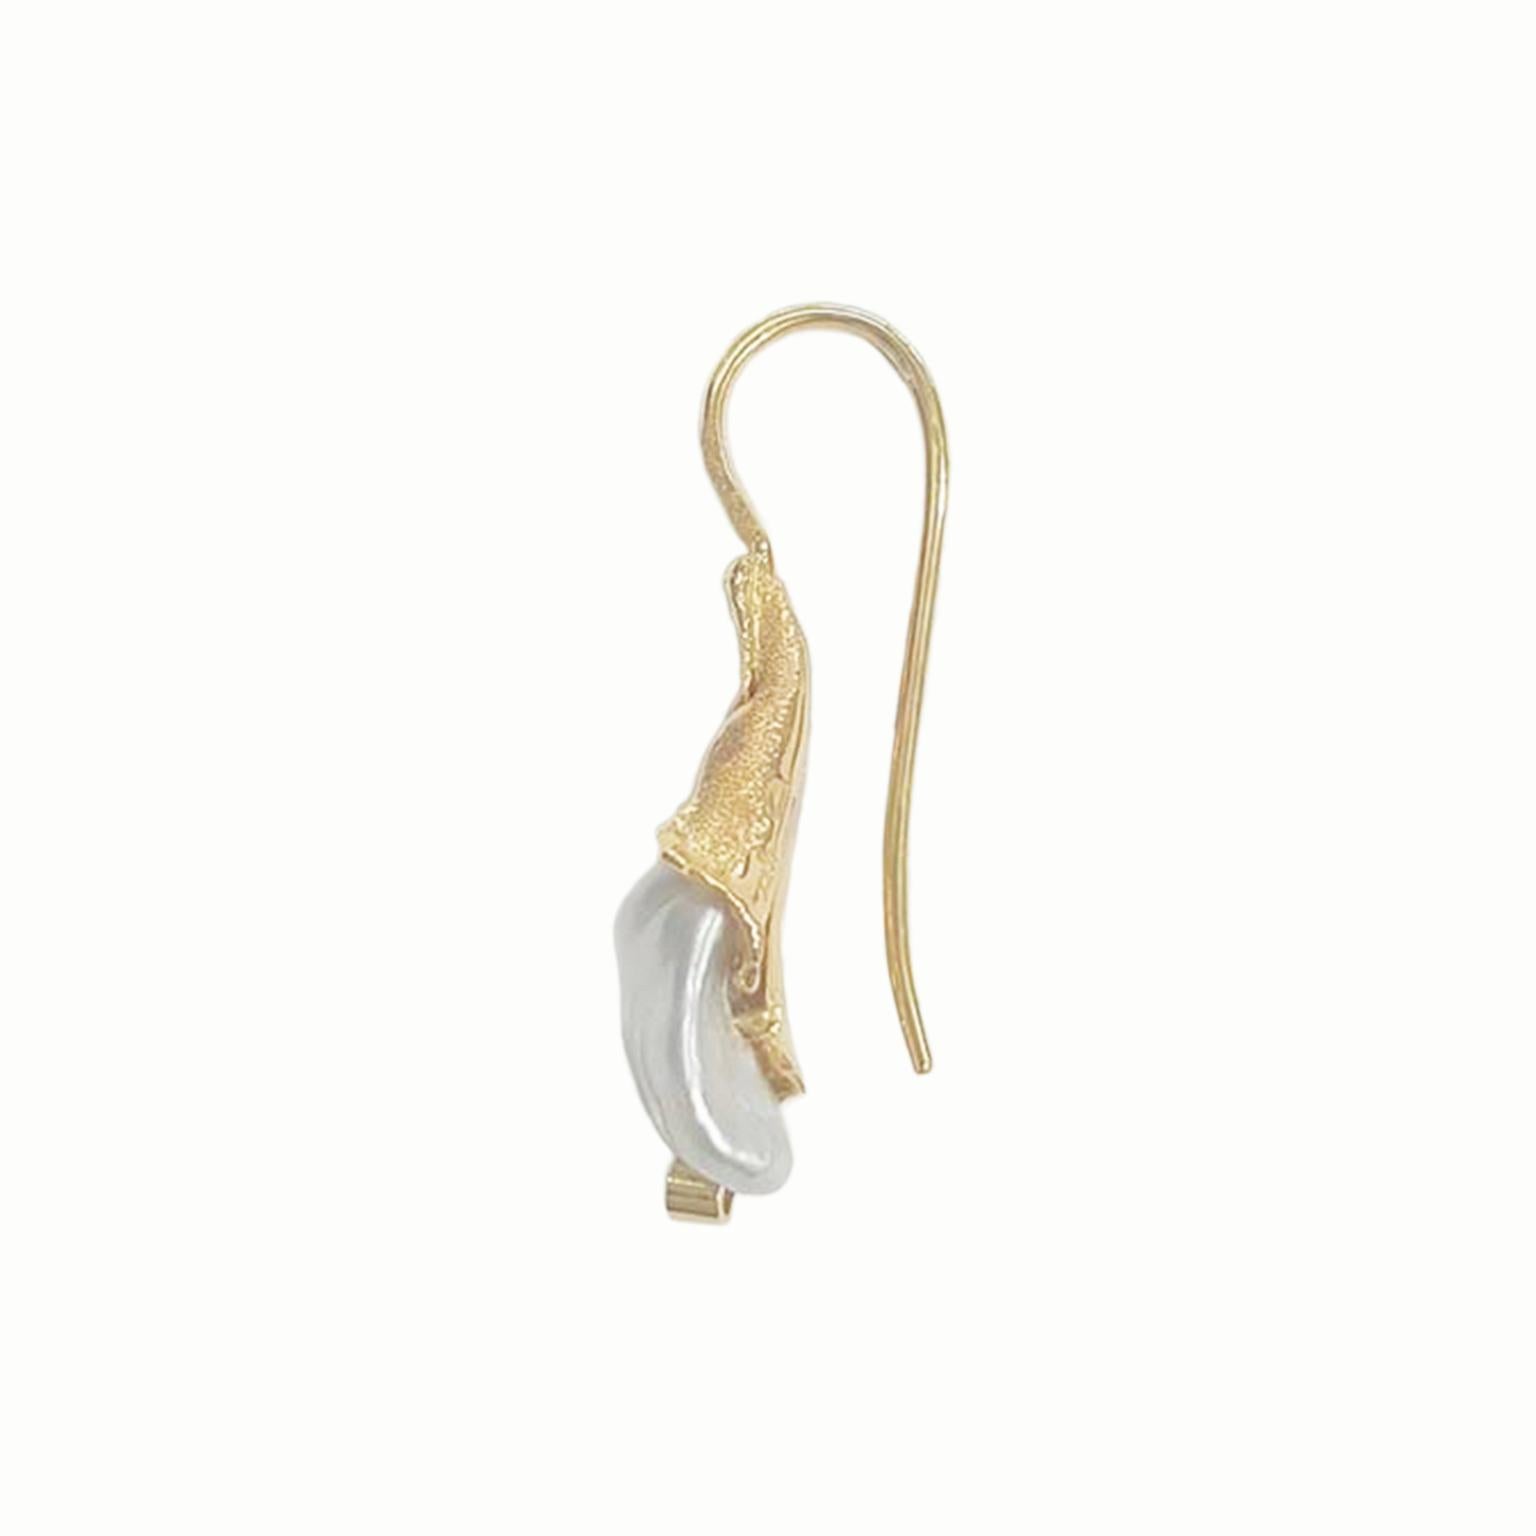 Introducing a breathtaking pair of luxury earrings by Paul Amey – an exquisite blend of elegance and artistry in 18ct yellow gold. These offset pearl earrings are a true manifestation of refined craftsmanship and creative design.

The stud earring